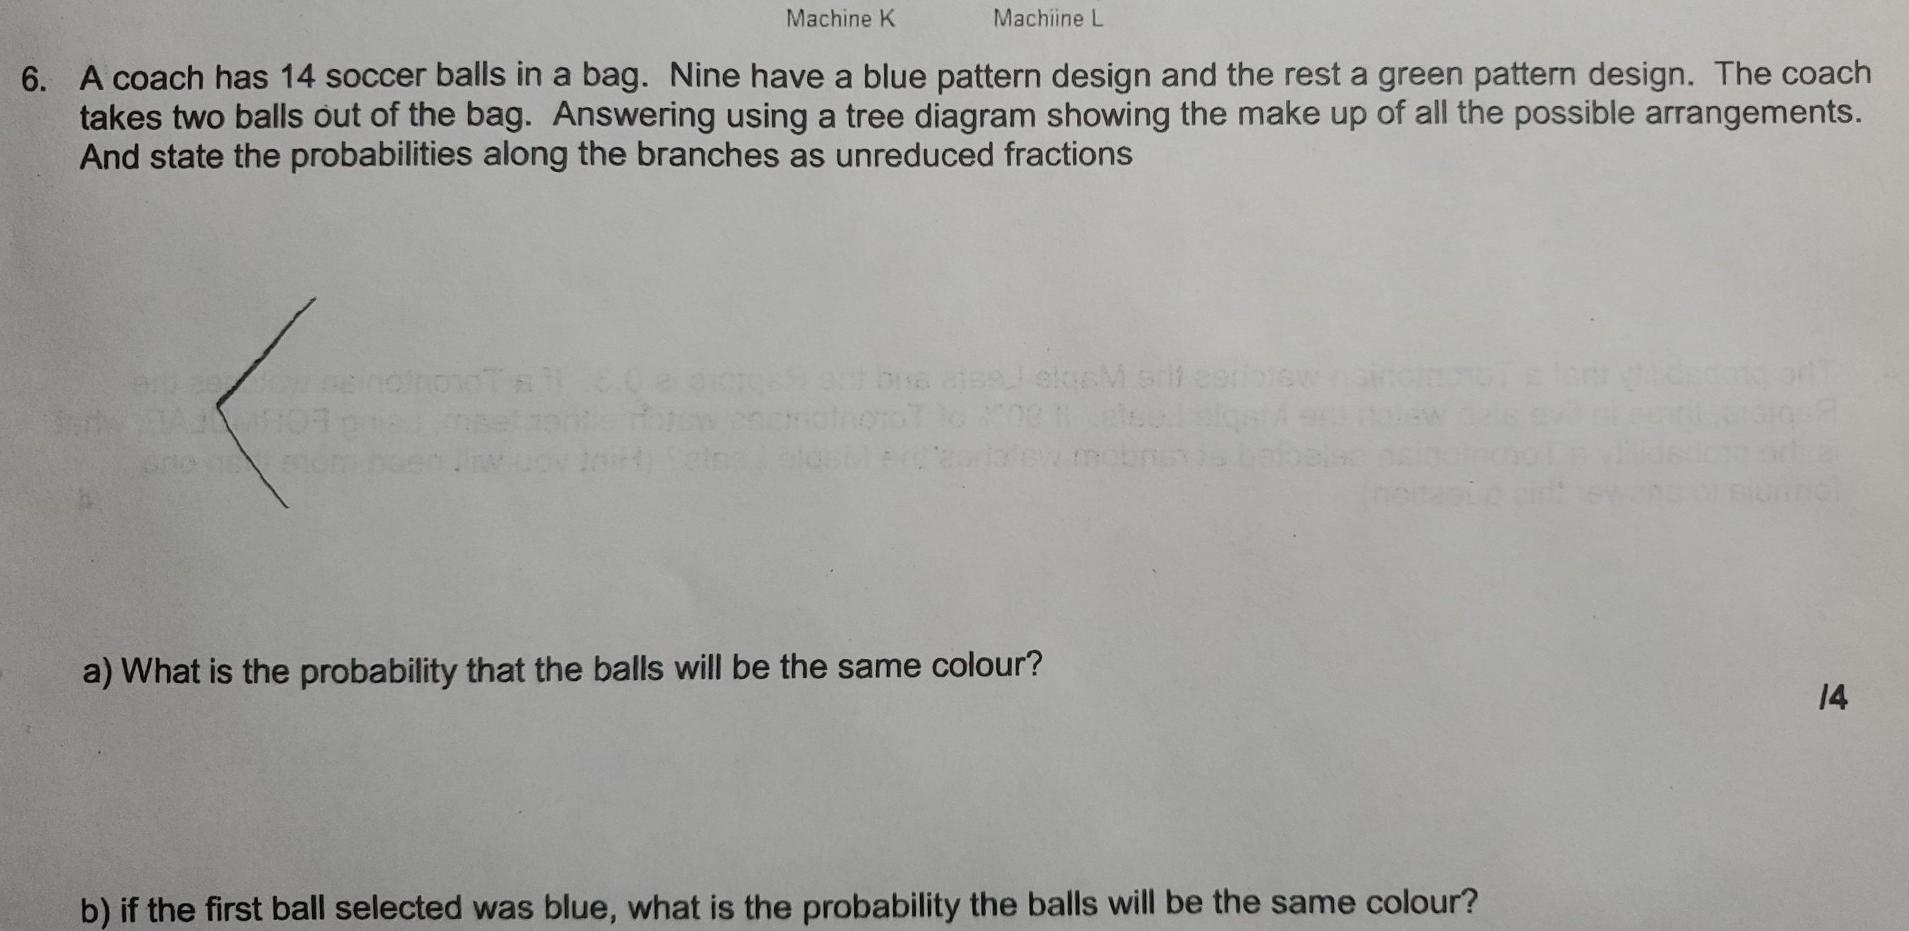 conditional probability when throwing balls multiple times from a bag -  Mathematics Stack Exchange